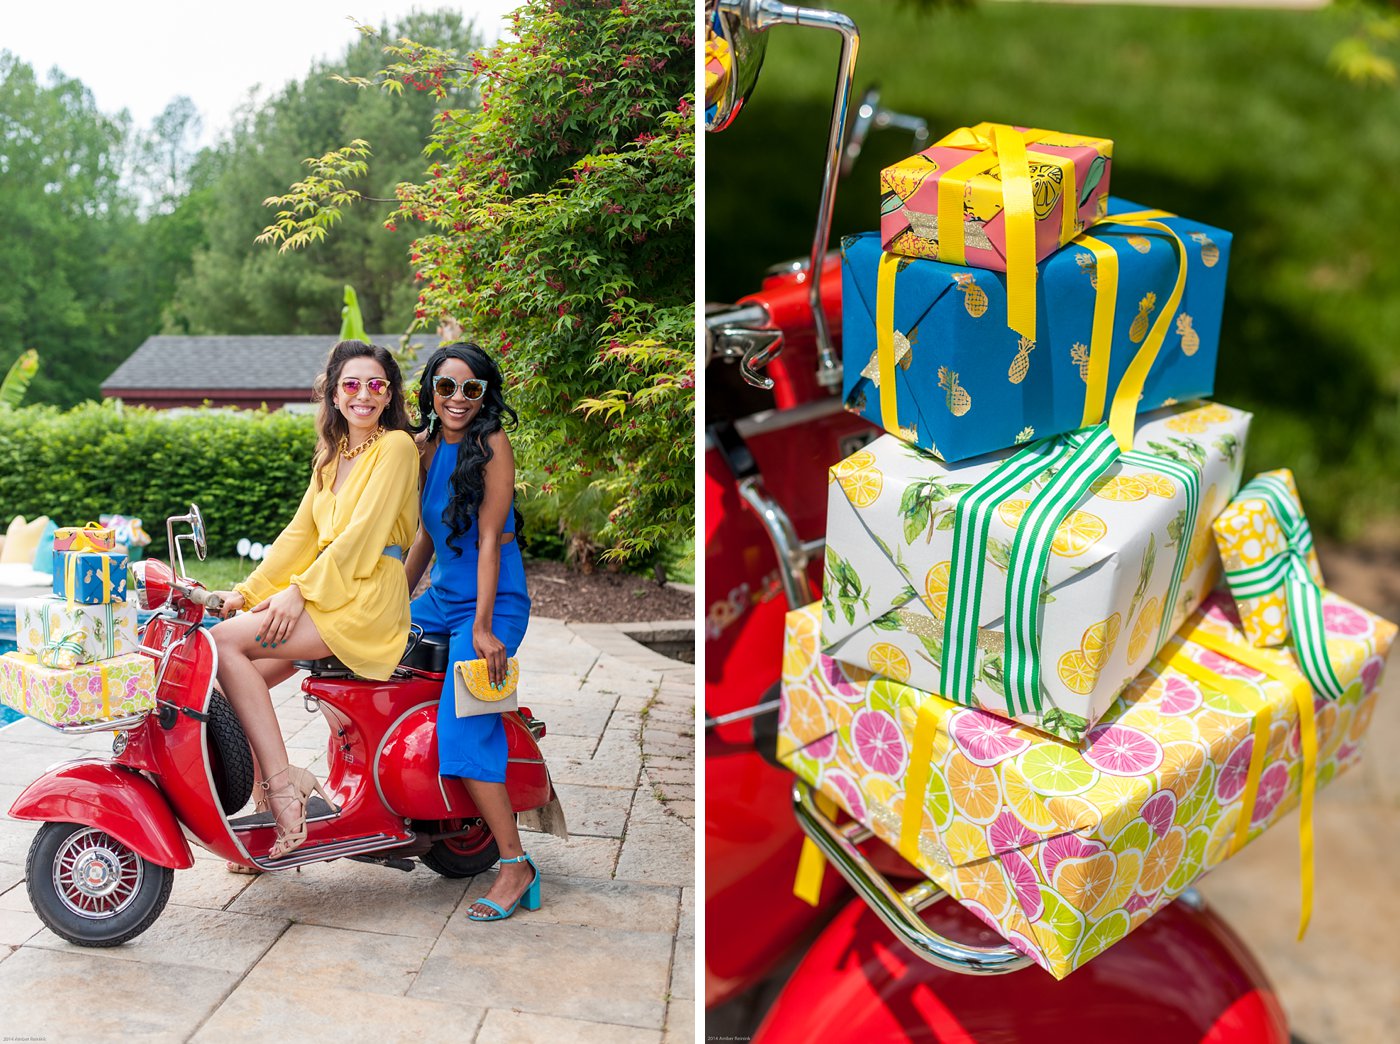 cabana styled birthday party with girls on red vintage vespa with presents bandit's ridge louisa, va